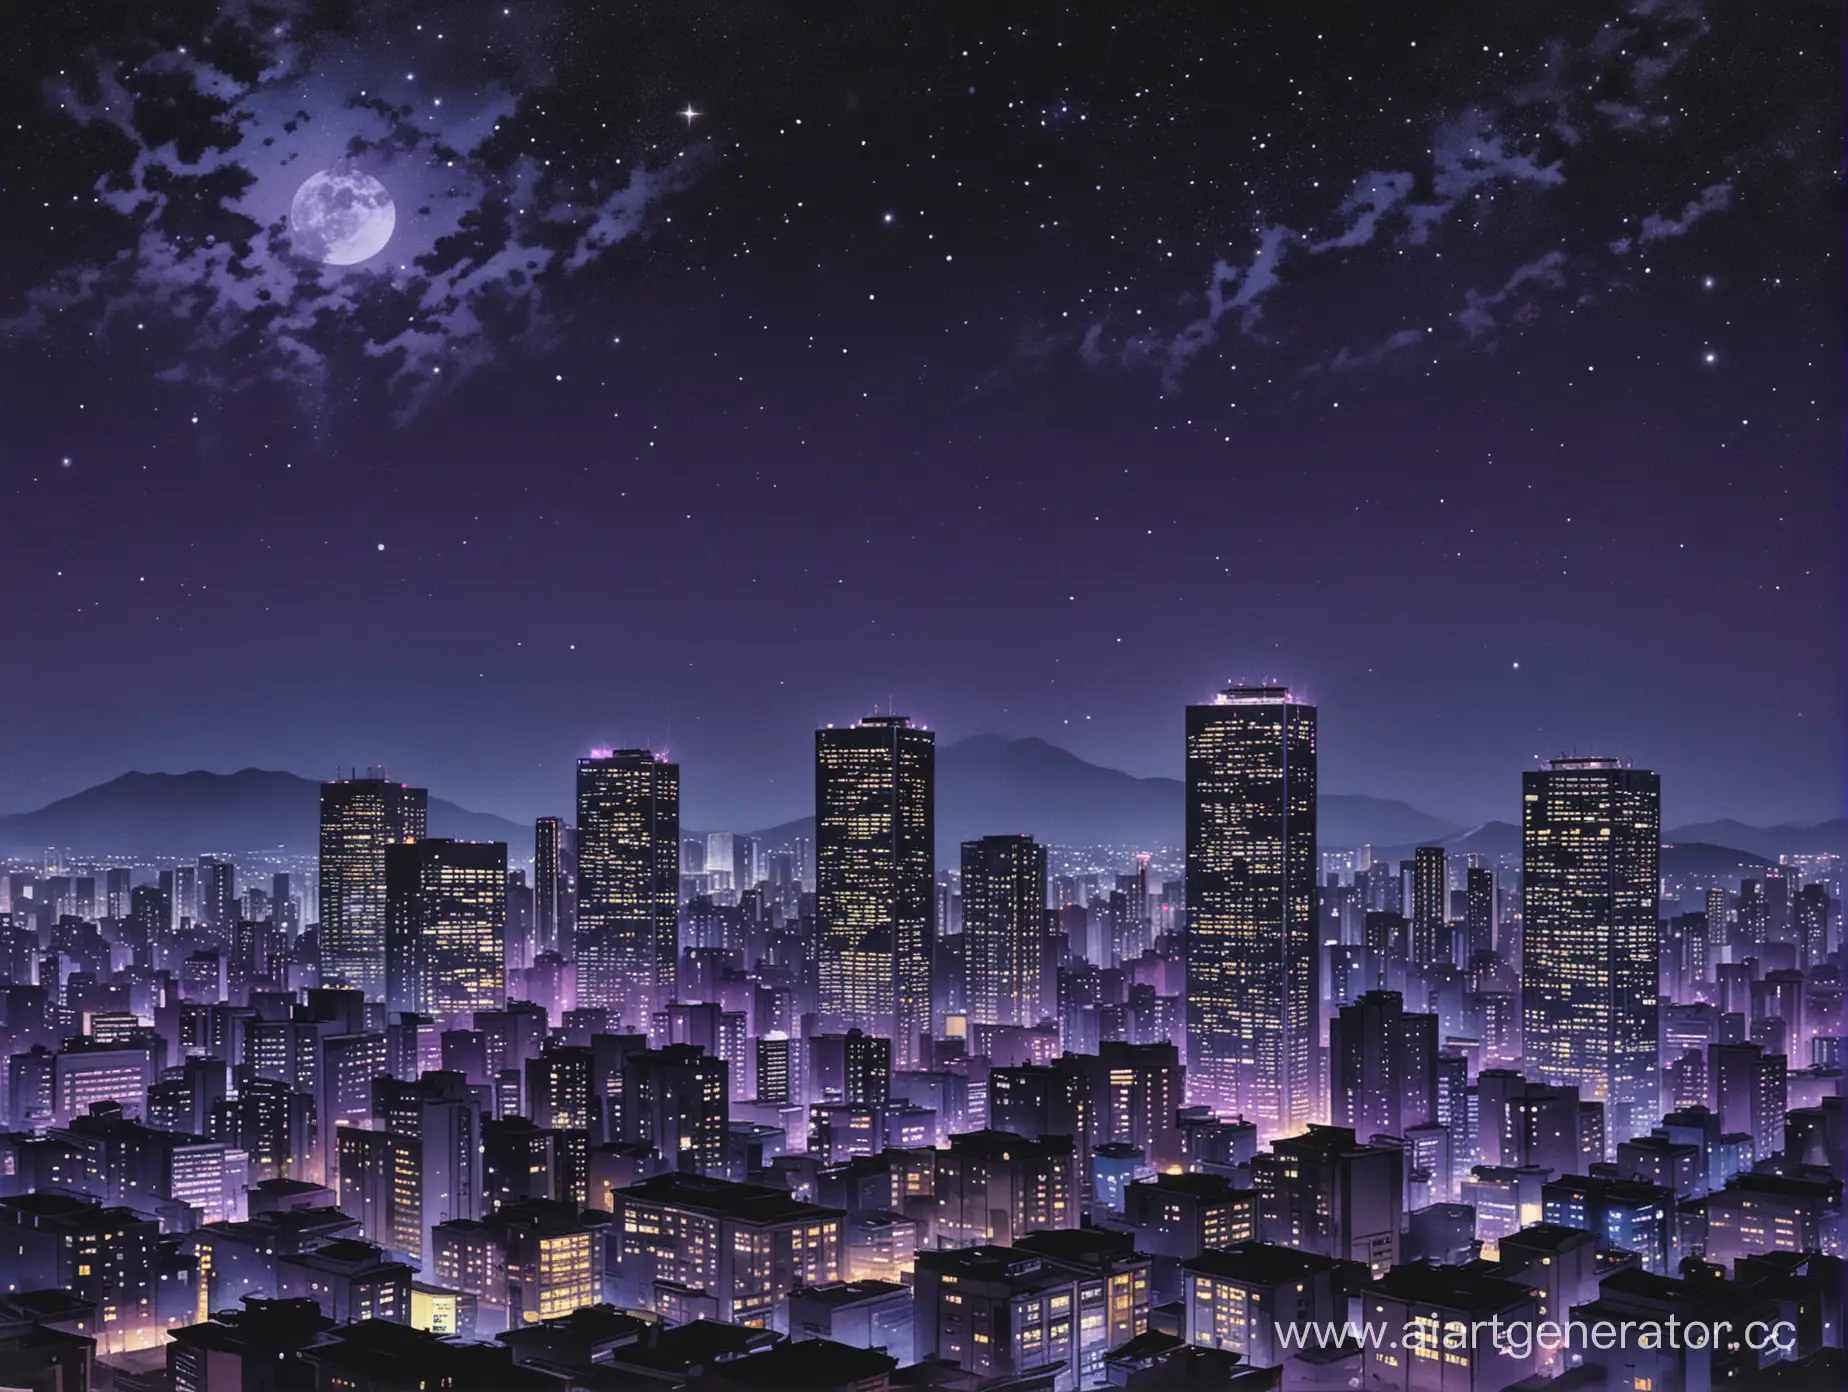 Japanese-HighRise-Buildings-Illuminated-by-Moonlight-under-a-Vibrant-Starry-Sky